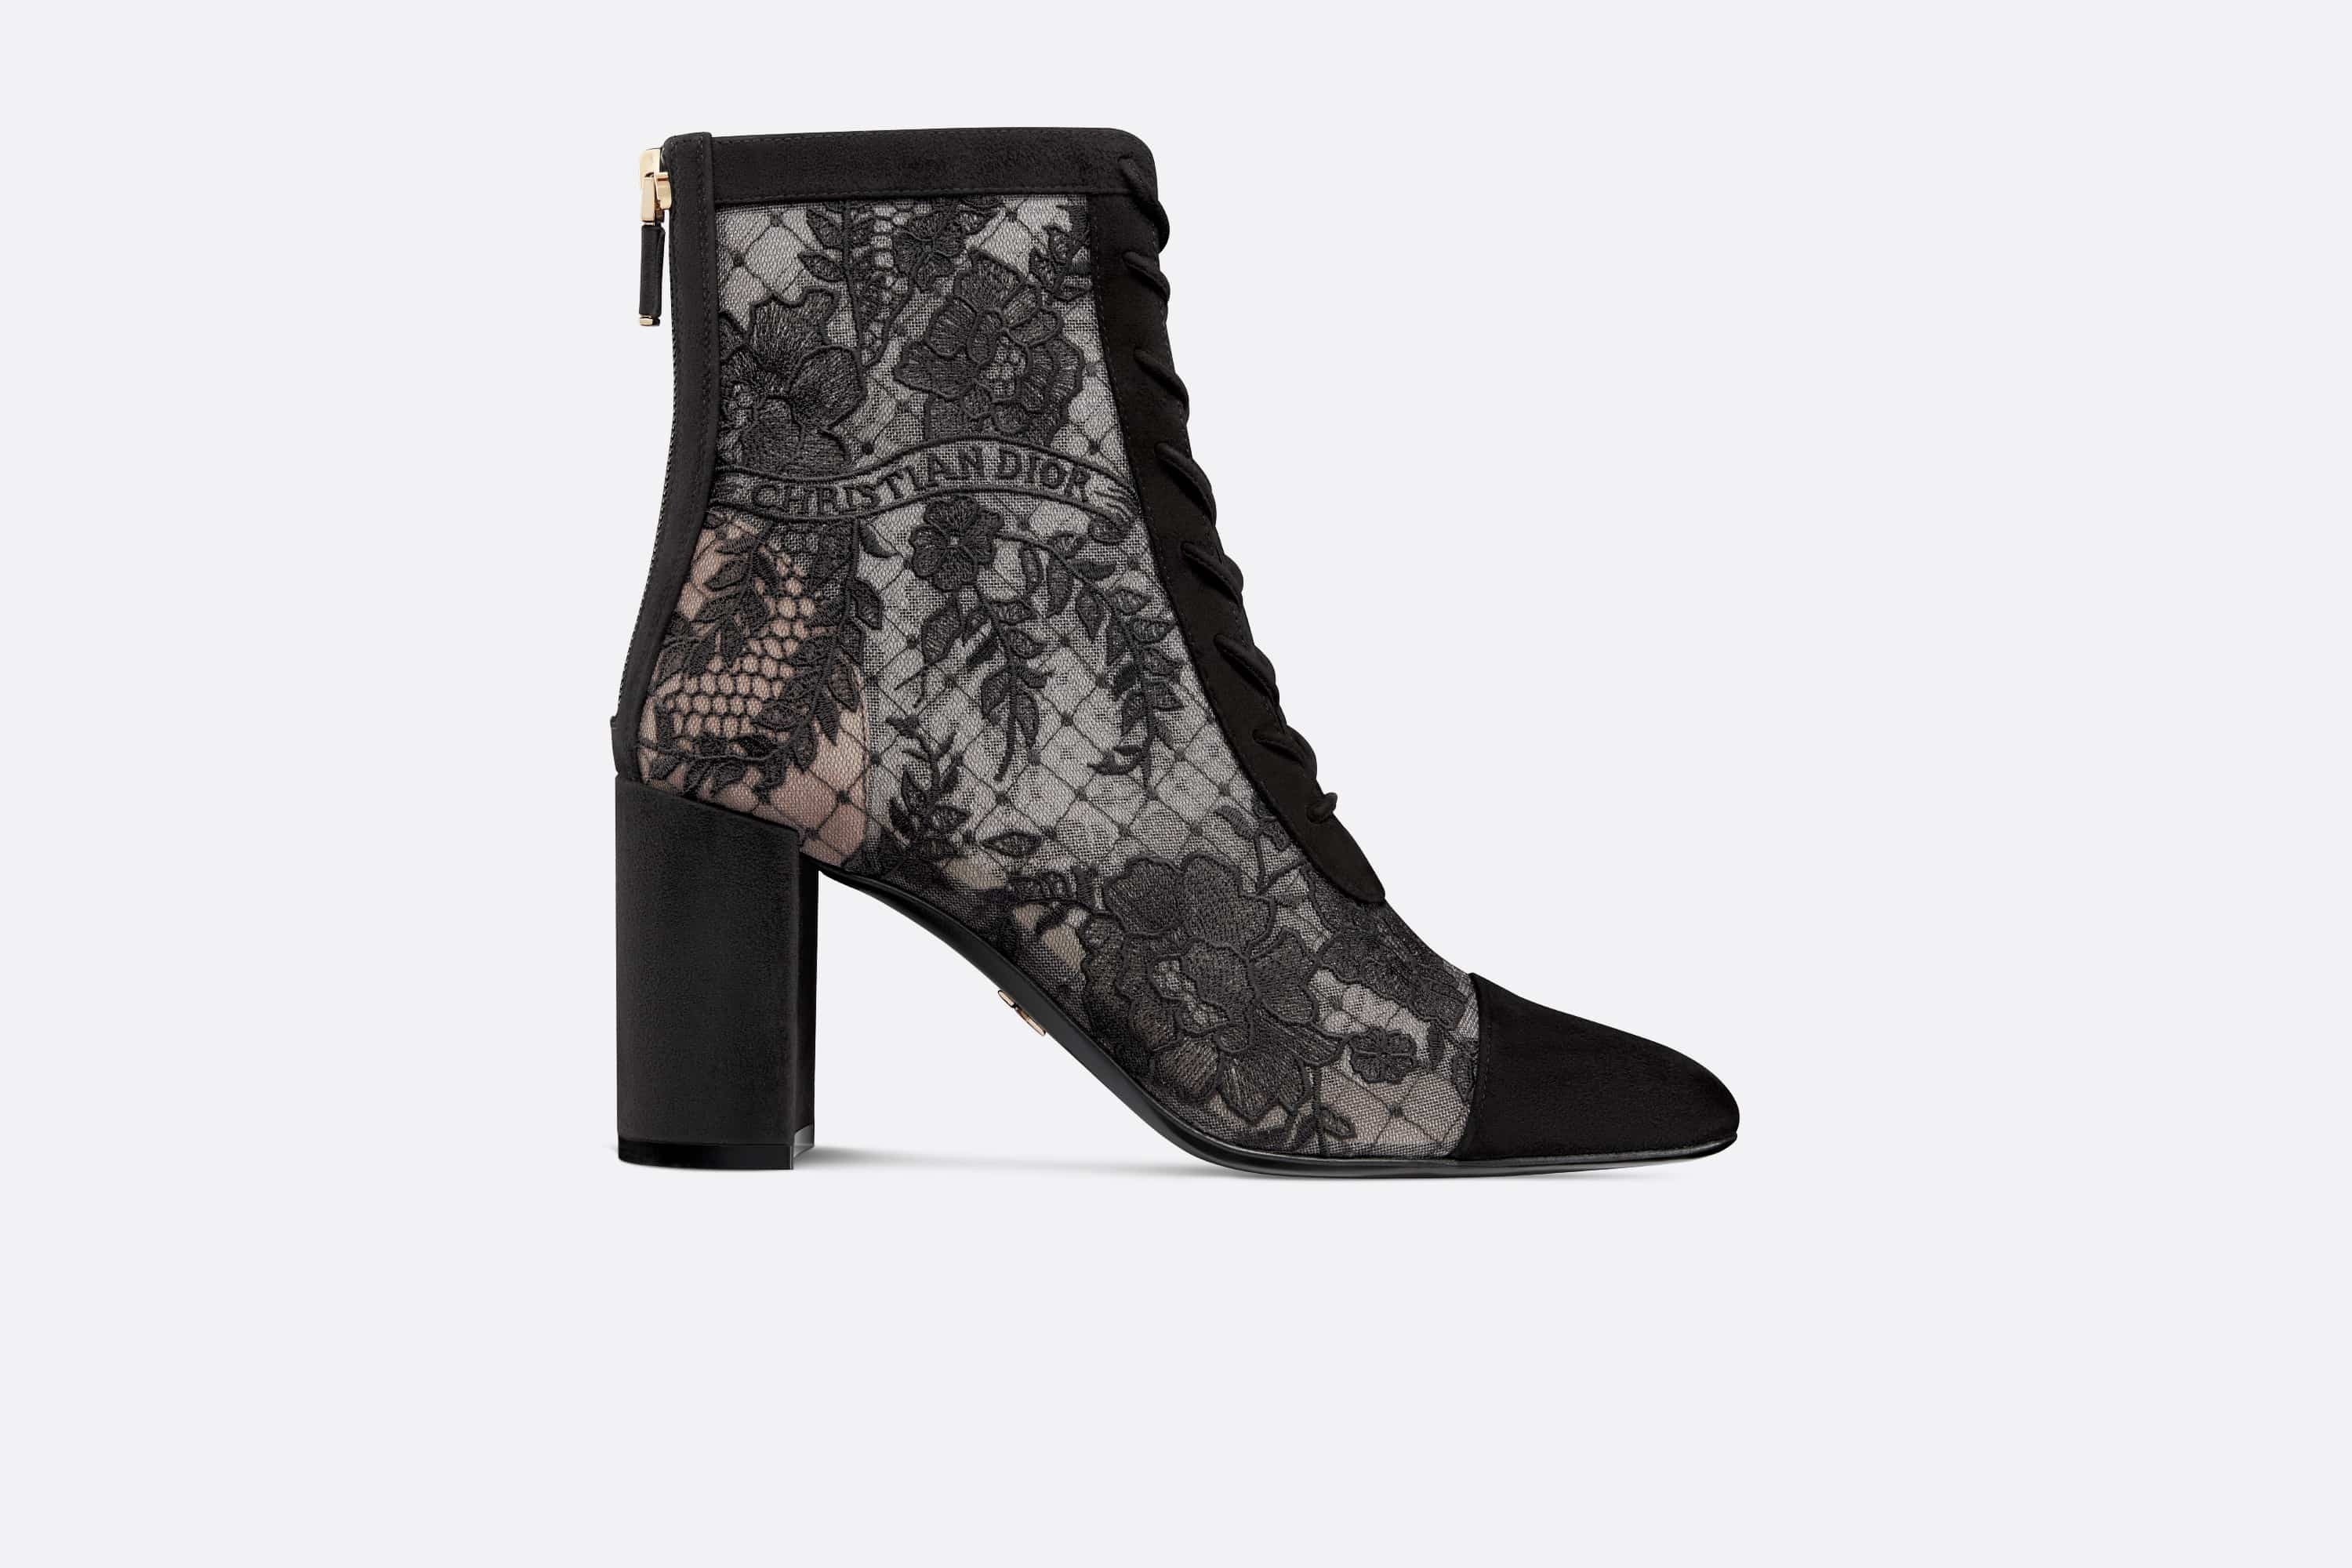 Naughtily-D Heeled Ankle Boot - 4